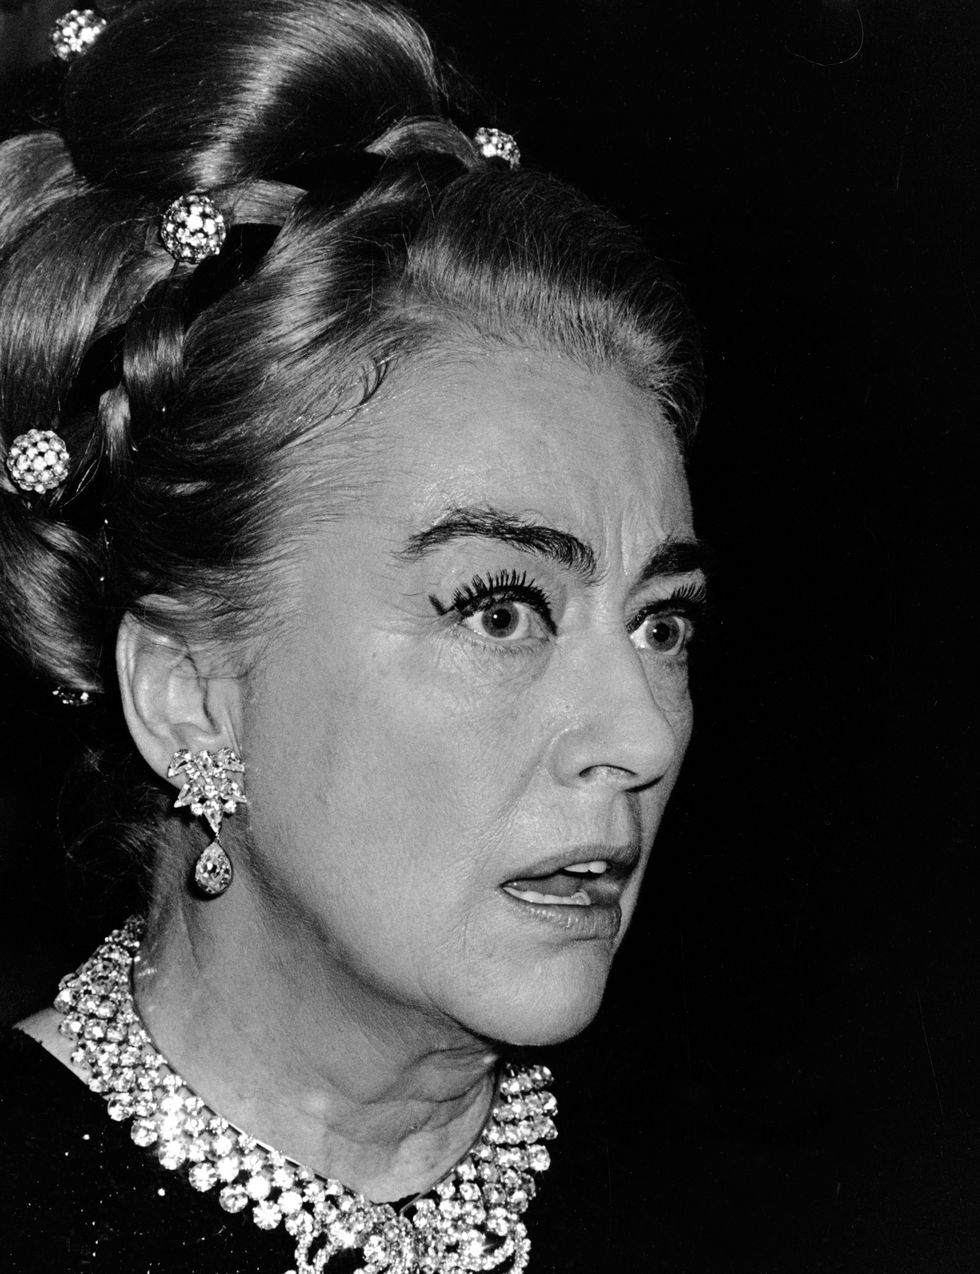 new york city   september 21  joan crawford attends rms cuncard farewell queen mary gala on september 21, 1967 aboard the queen mary in new york city photo by ron galella, ltdron galella collection via getty images